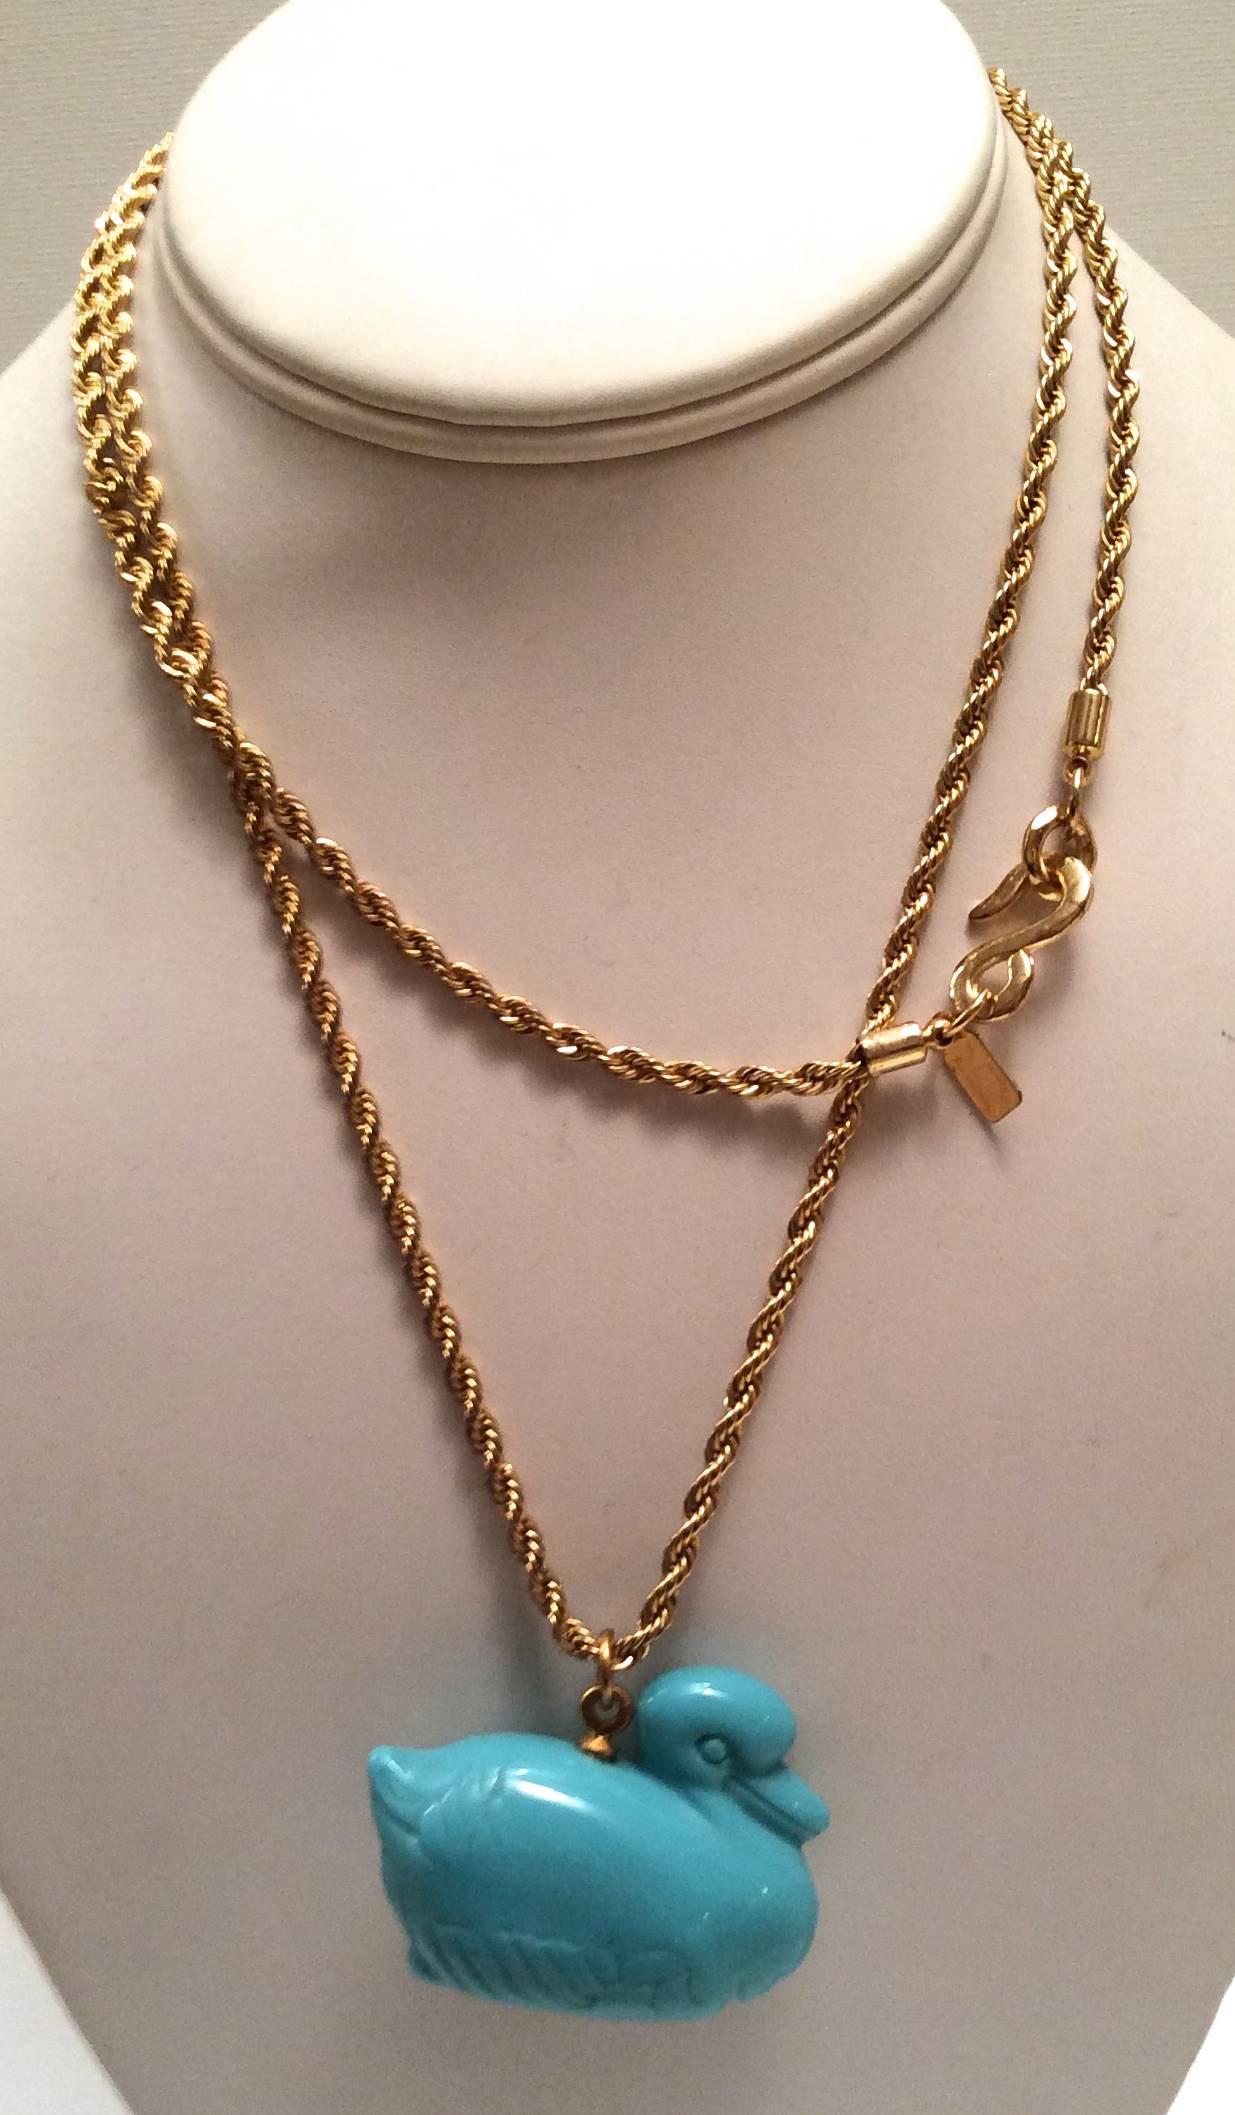 This new adorable KJL necklace is a fun little addition to any wardrobe. The gold tone chain is signed Kenneth J Lane. The necklace measures 30 inches. The duck is 2 inches long and 1.5 inches high from the head, and the body of the duck is 1 inch. 